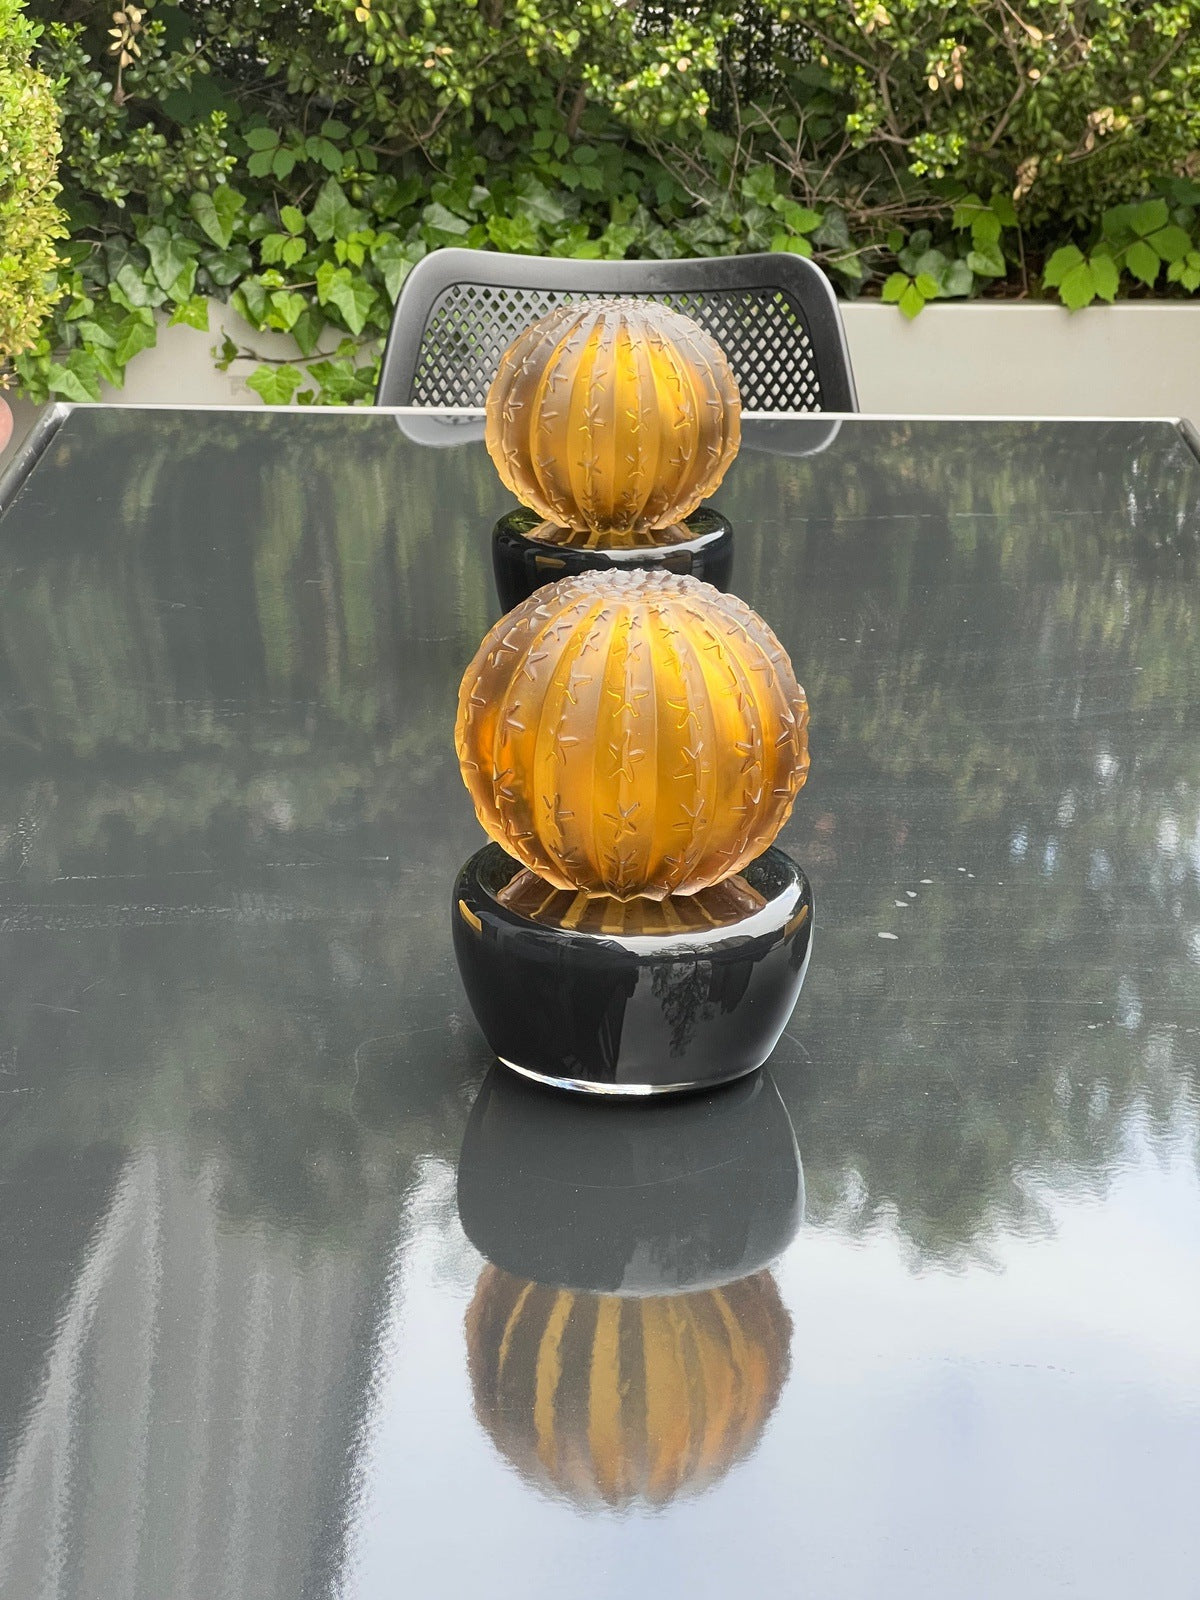 Barrel Cactus Luxury Glass Sculpture 2 Amber Cacti on a table